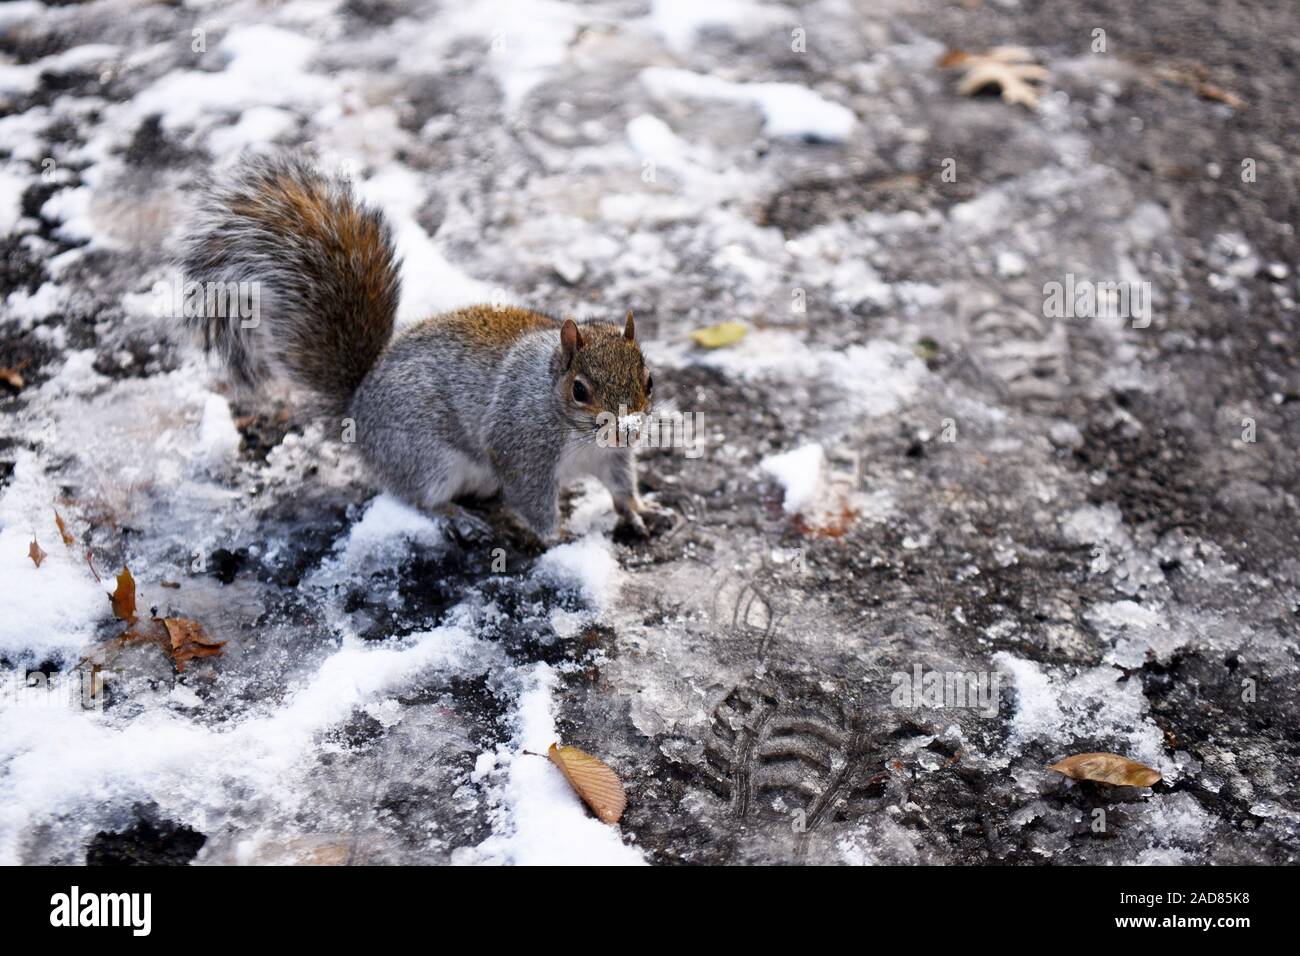 New York, USA. 3rd Dec, 2019. A squirrel is pictured after a snowfall in Central Park in New York, the United States, on Dec. 3, 2019. The first snowfall of the season hit New York City on Monday. Credit: Han Fang/Xinhua/Alamy Live News Stock Photo